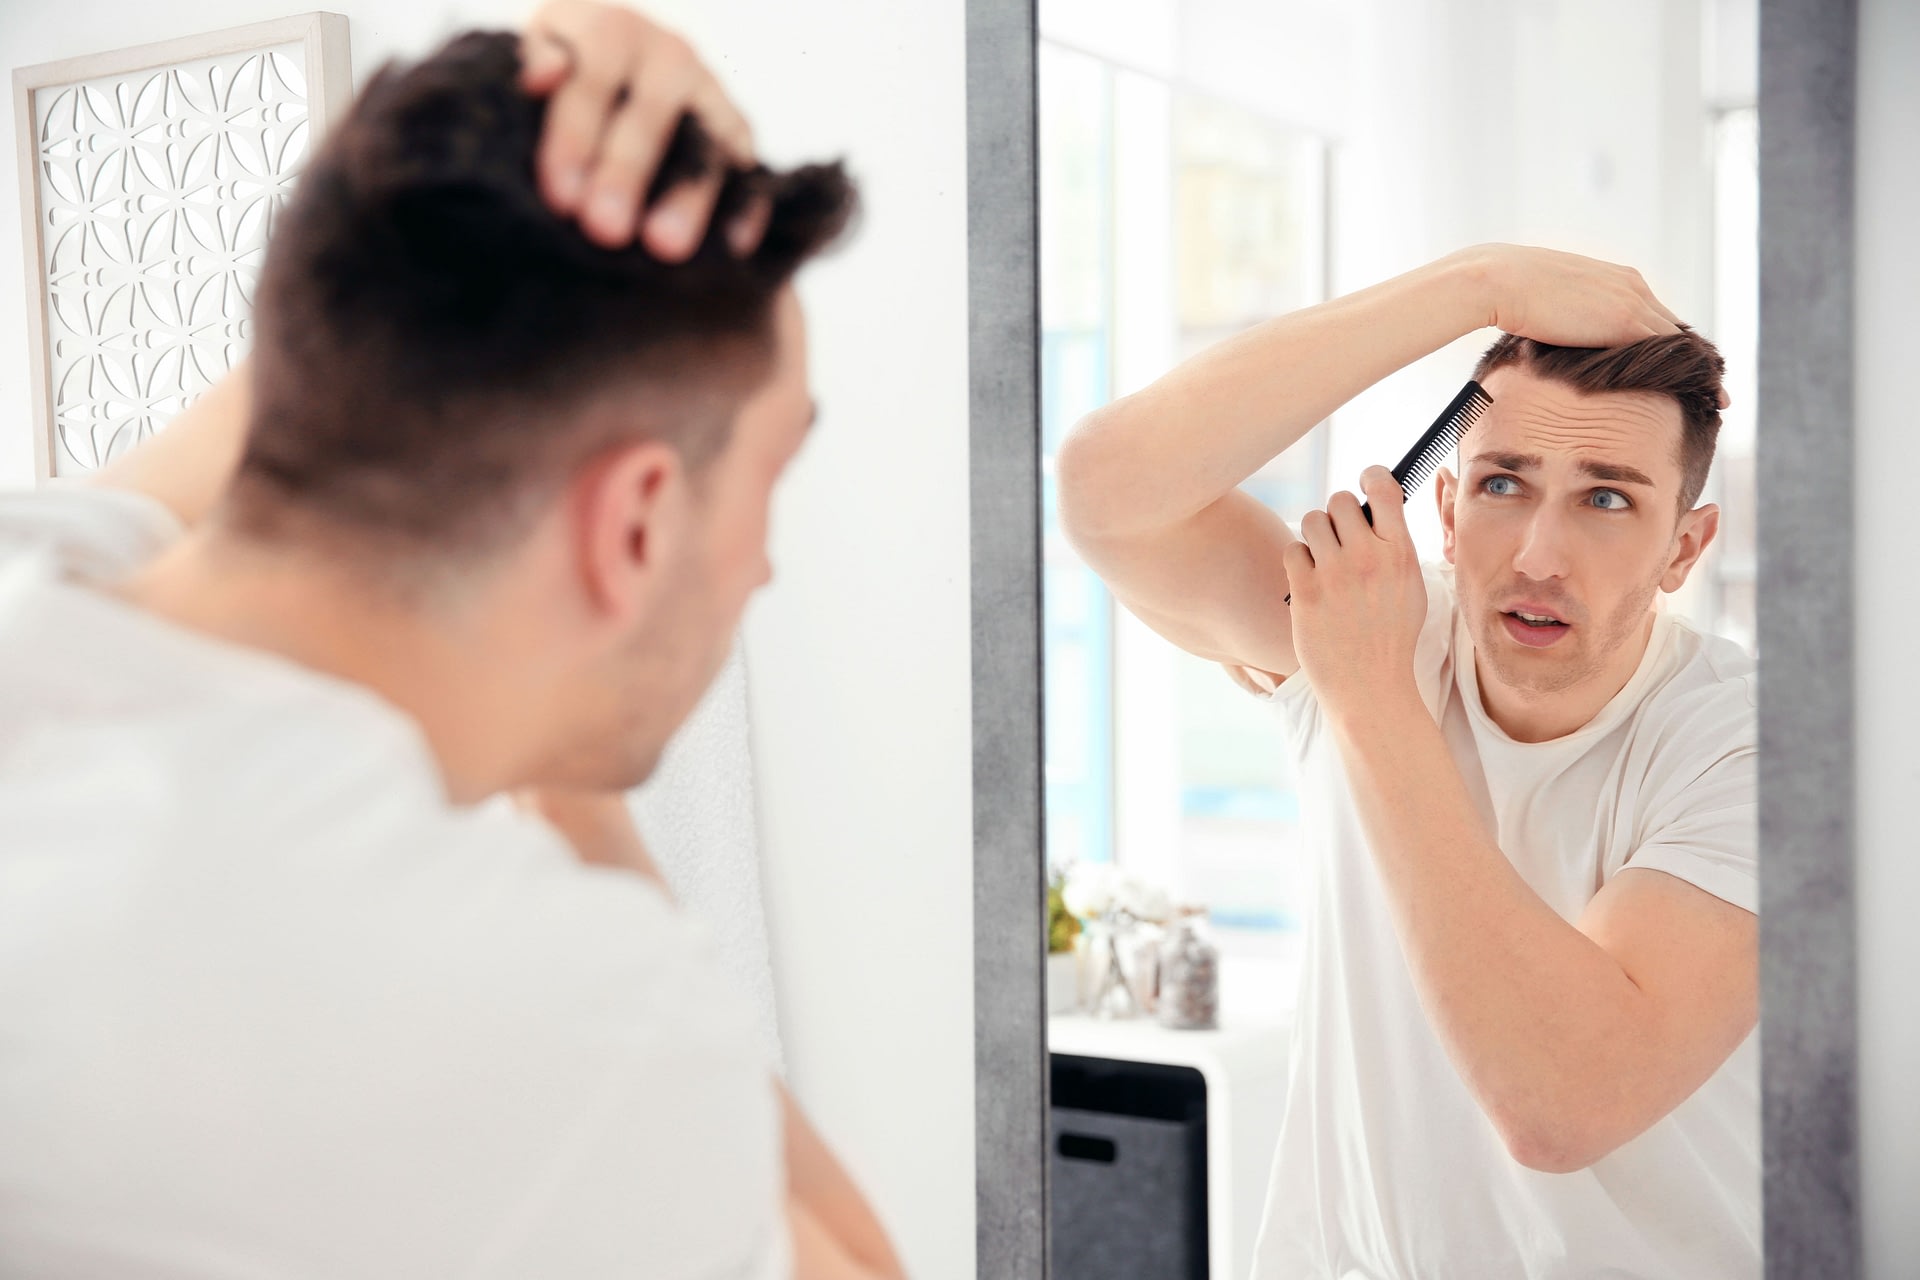 Man combing hair to prevent hair loss